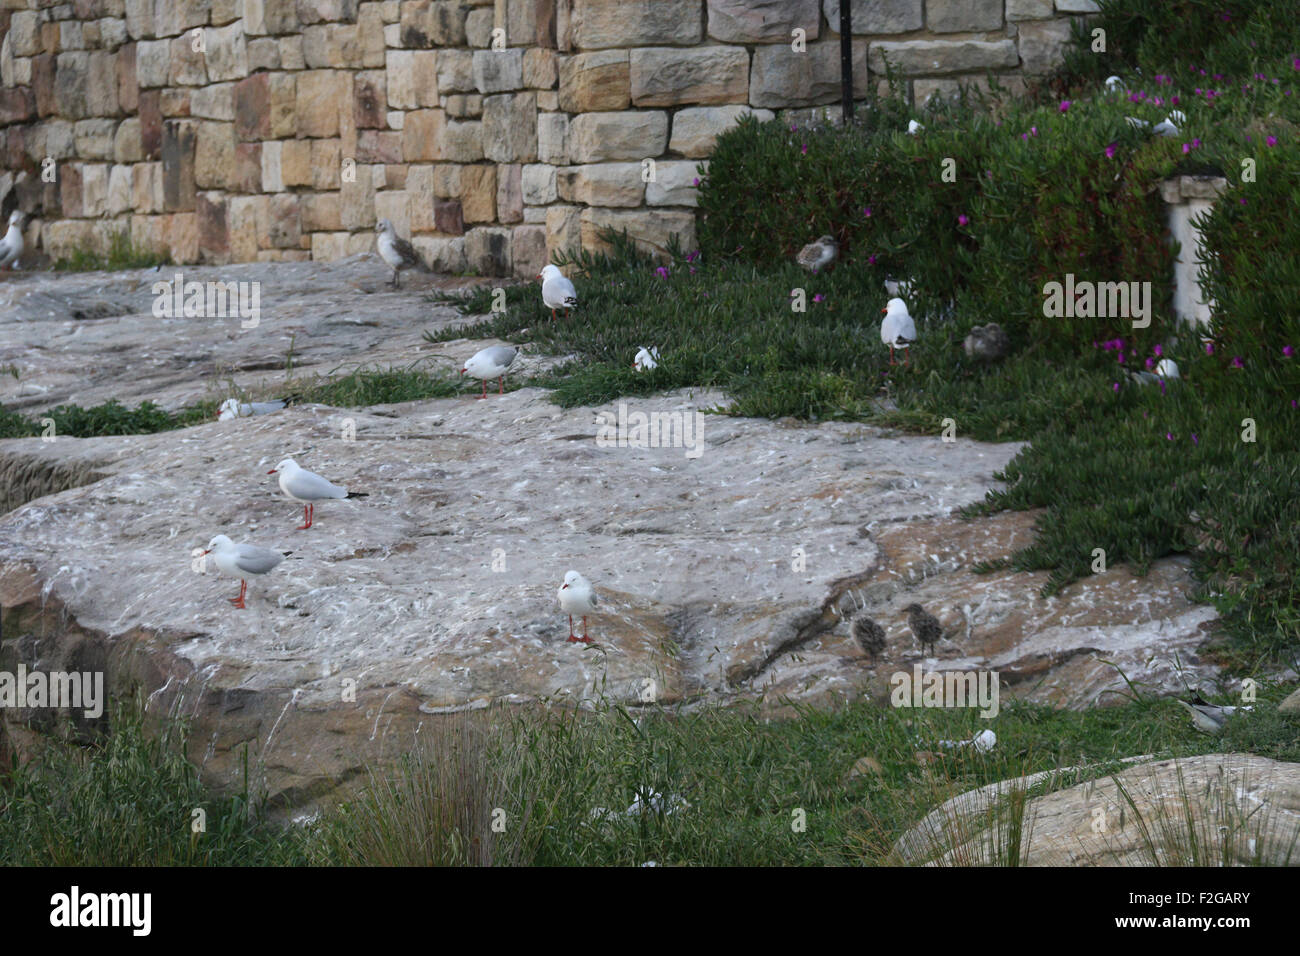 During Spring hundreds of seagulls build nests along the cliffs on Cockatoo Island in Sydney, Australia. Stock Photo